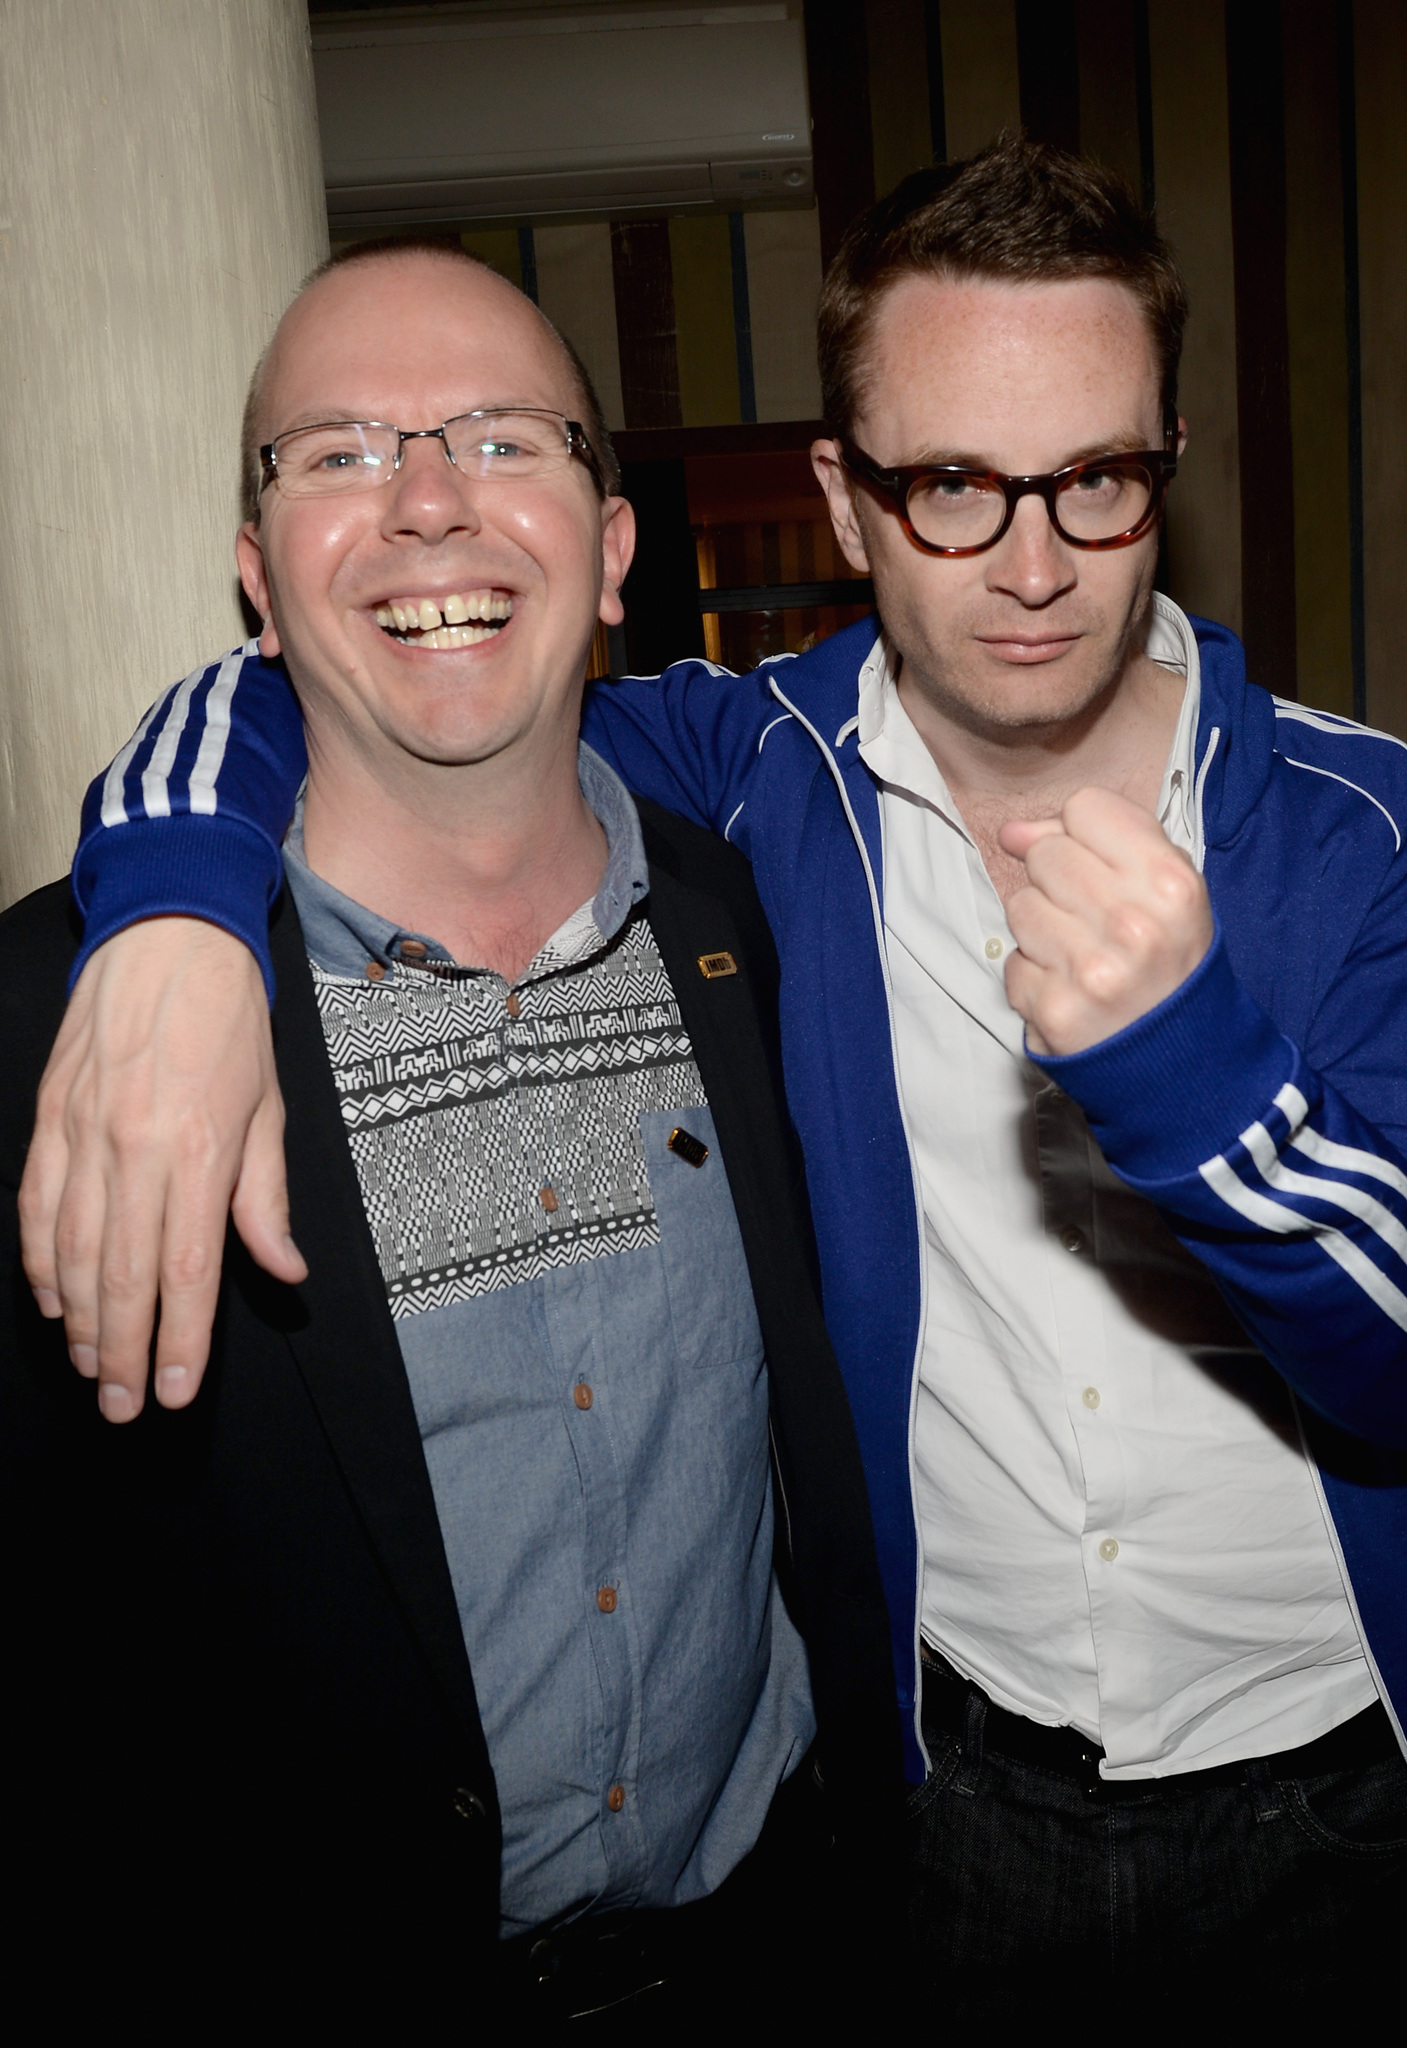 IMDb founder Col Needham and director Nicolas Winding Refn attend the IMDB's 2013 Cannes Film Festival Dinner Party during the 66th Annual Cannes Film Festival at Restaurant Mantel on May 20, 2013 in Cannes, France.